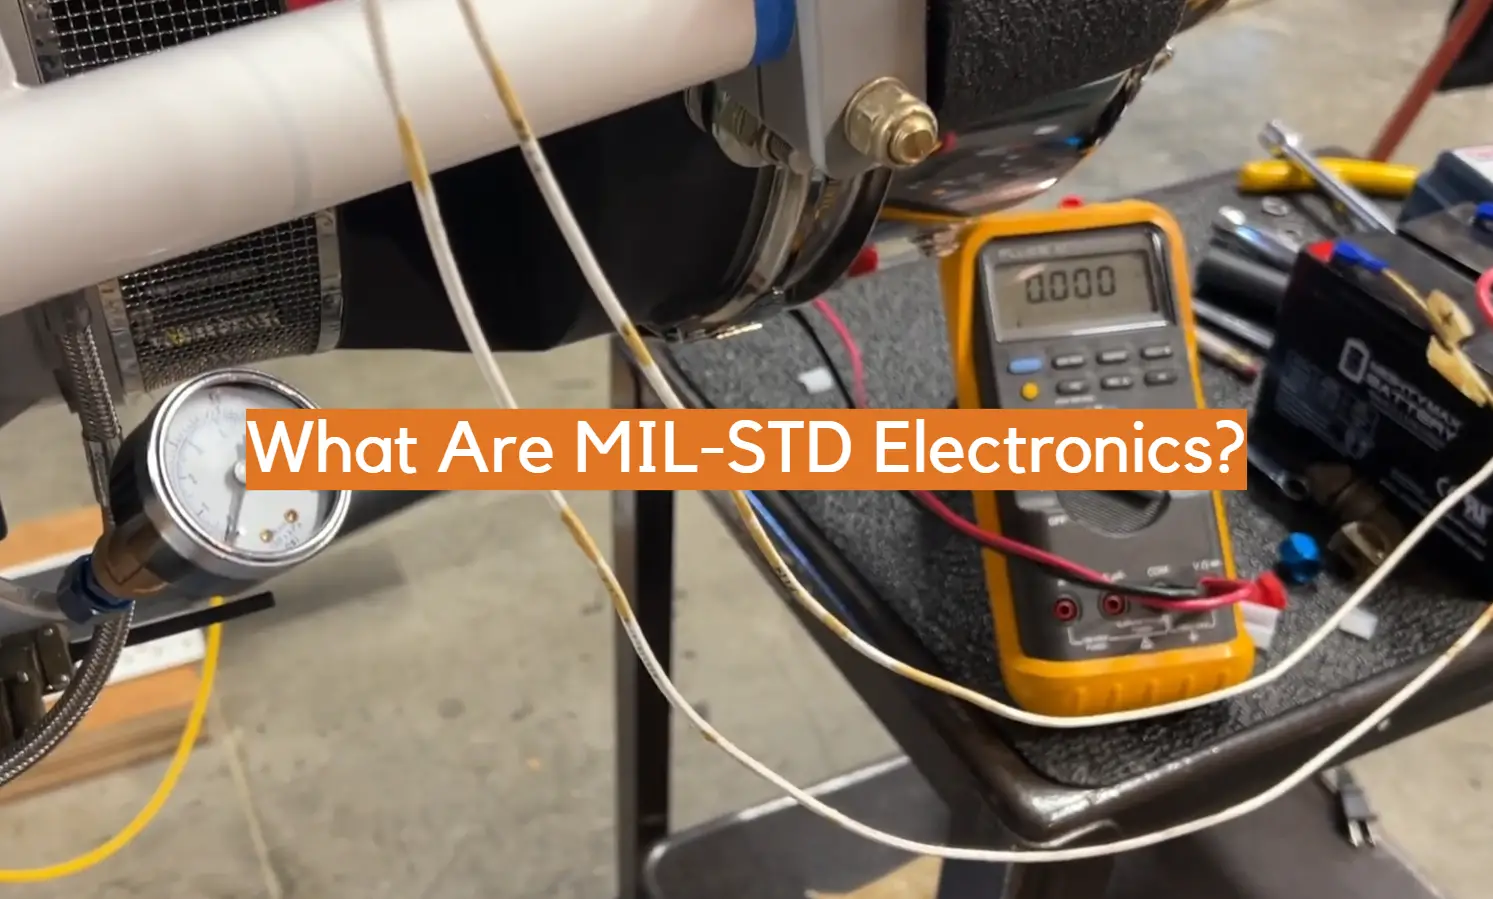 What Are MIL-STD Electronics?